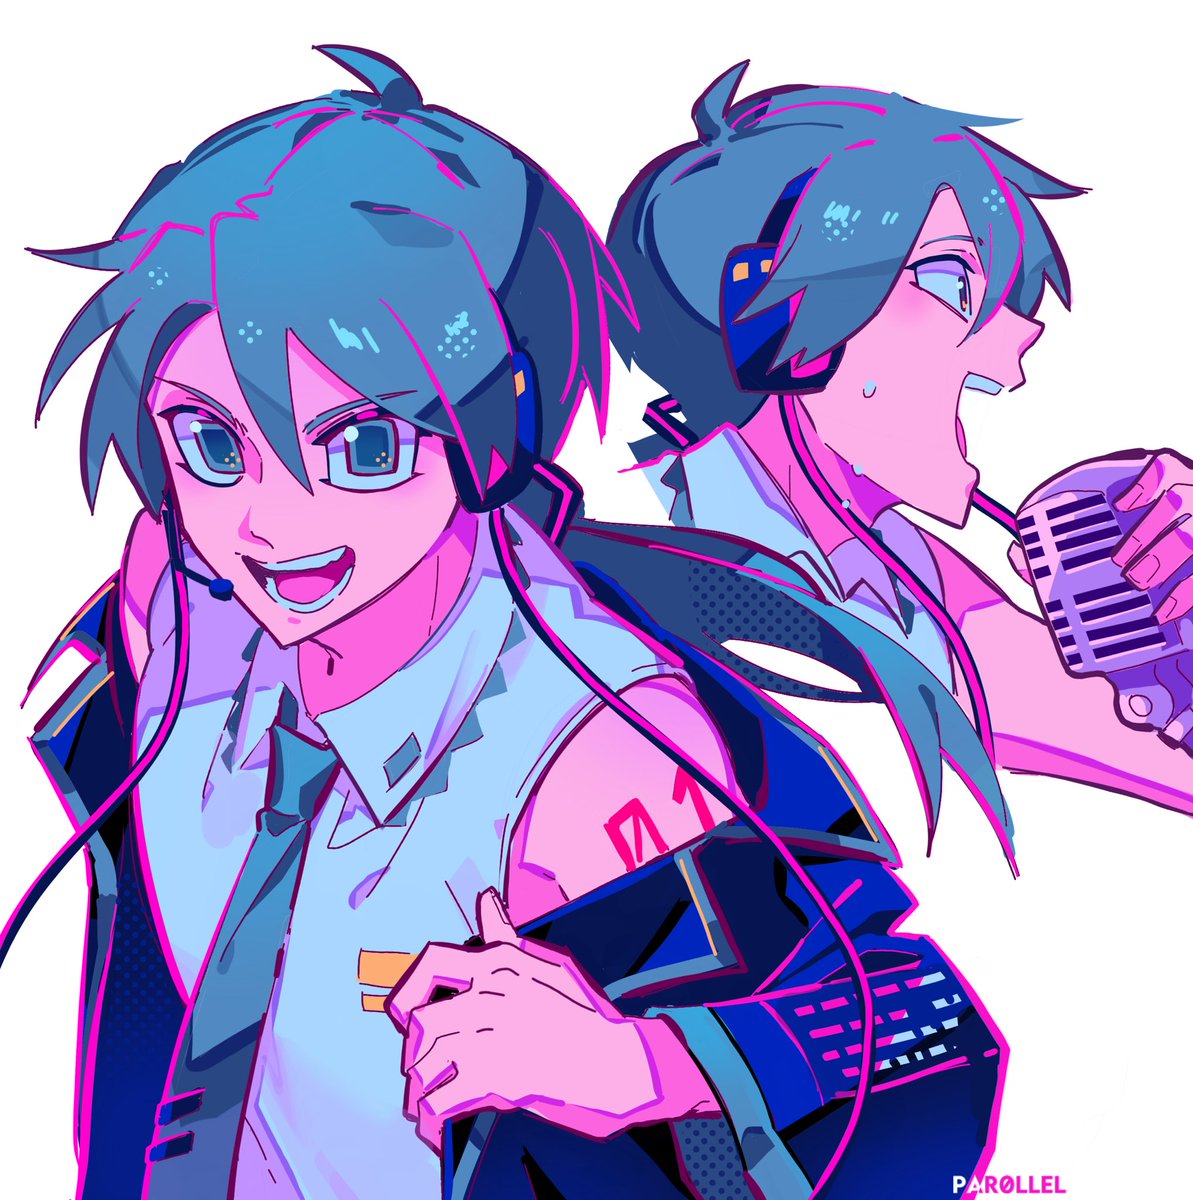 「Mikuo 」|✖️ par0llel ✖️のイラスト